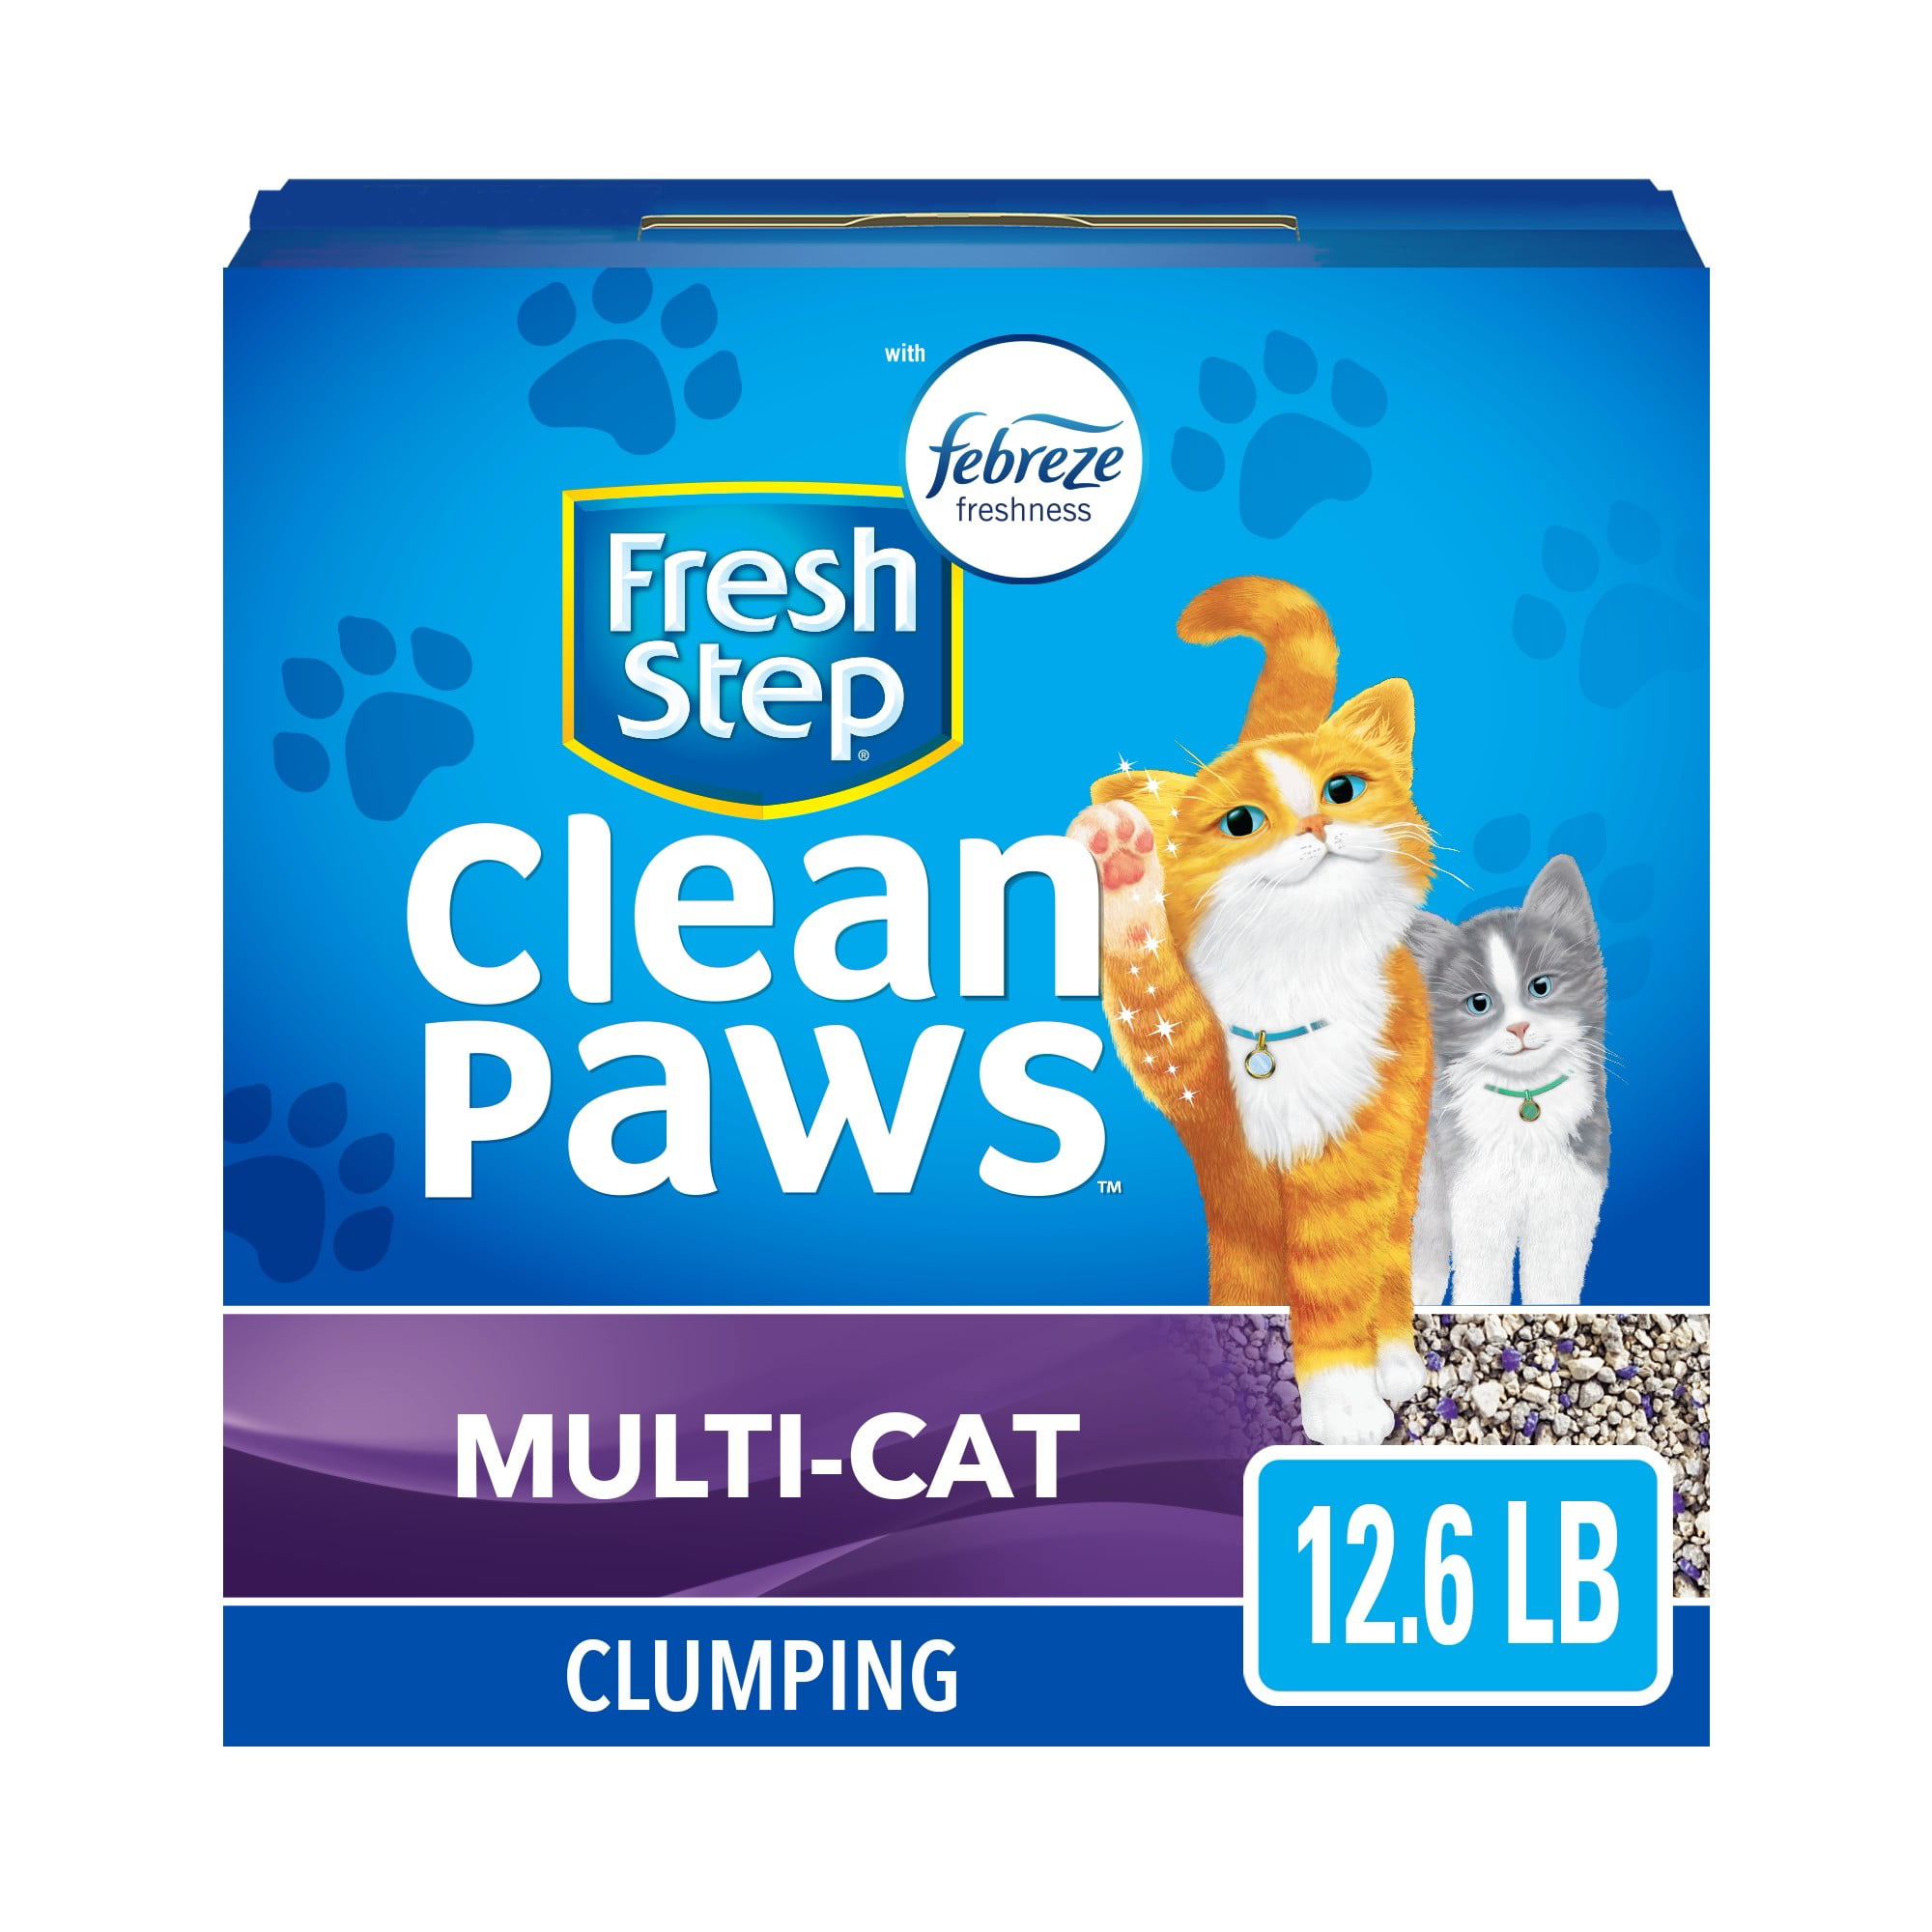 Fresh Step Multi Cat Litter 24 Your Customers Really Think About Your